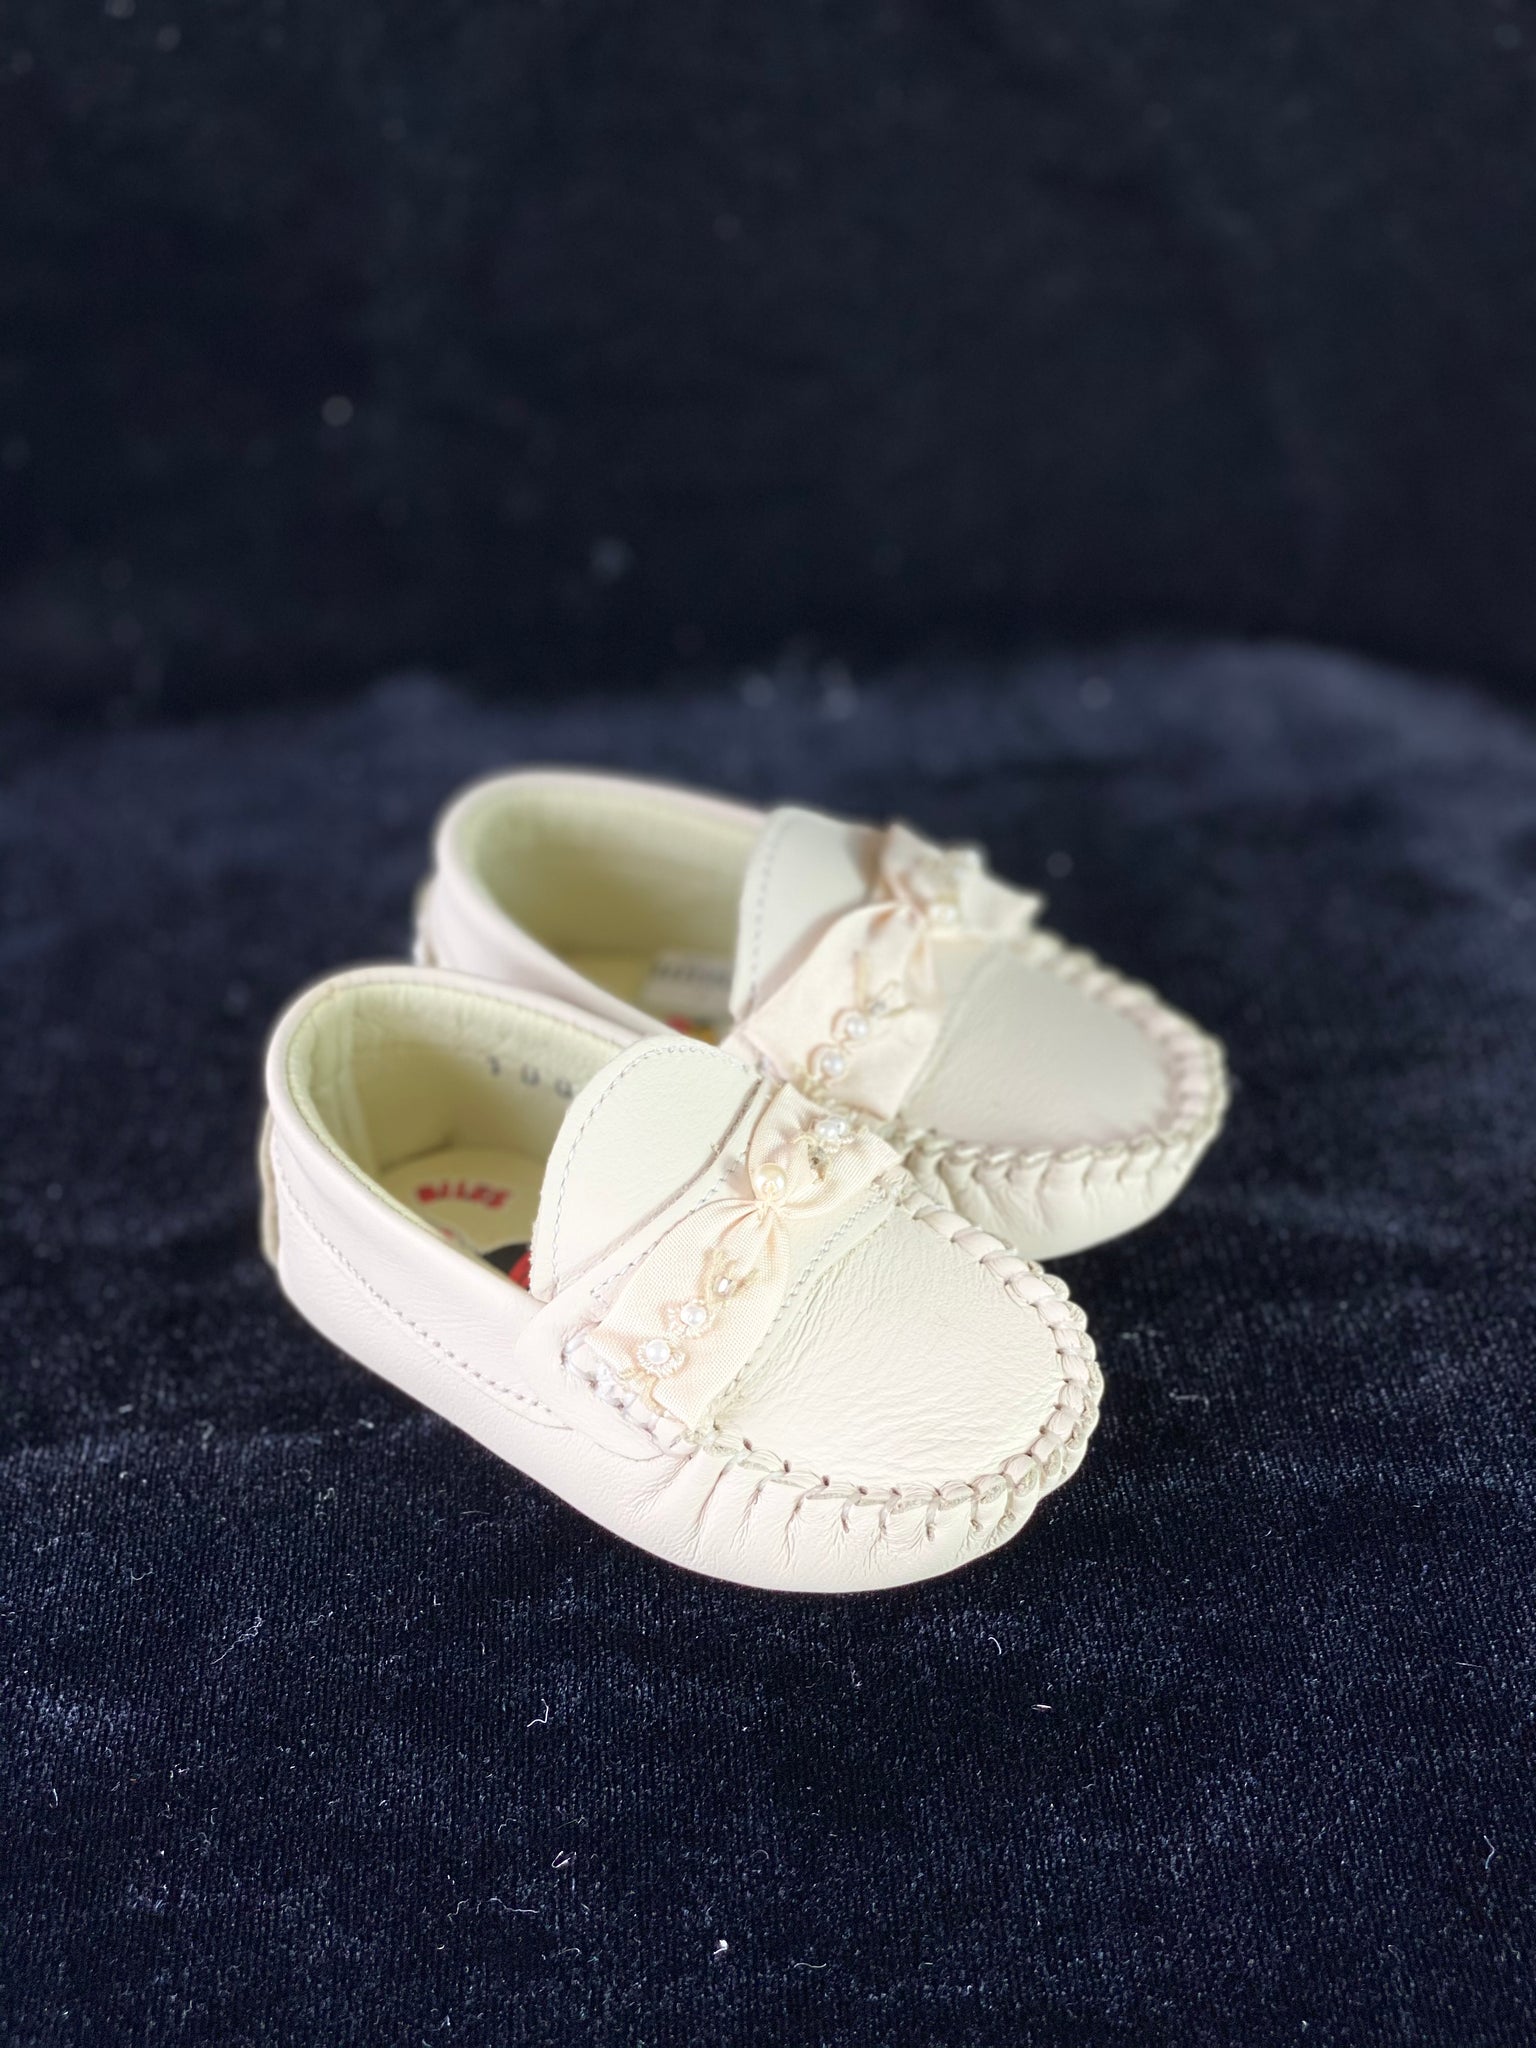 Soft pleather ivory loafers with bow and pearls.